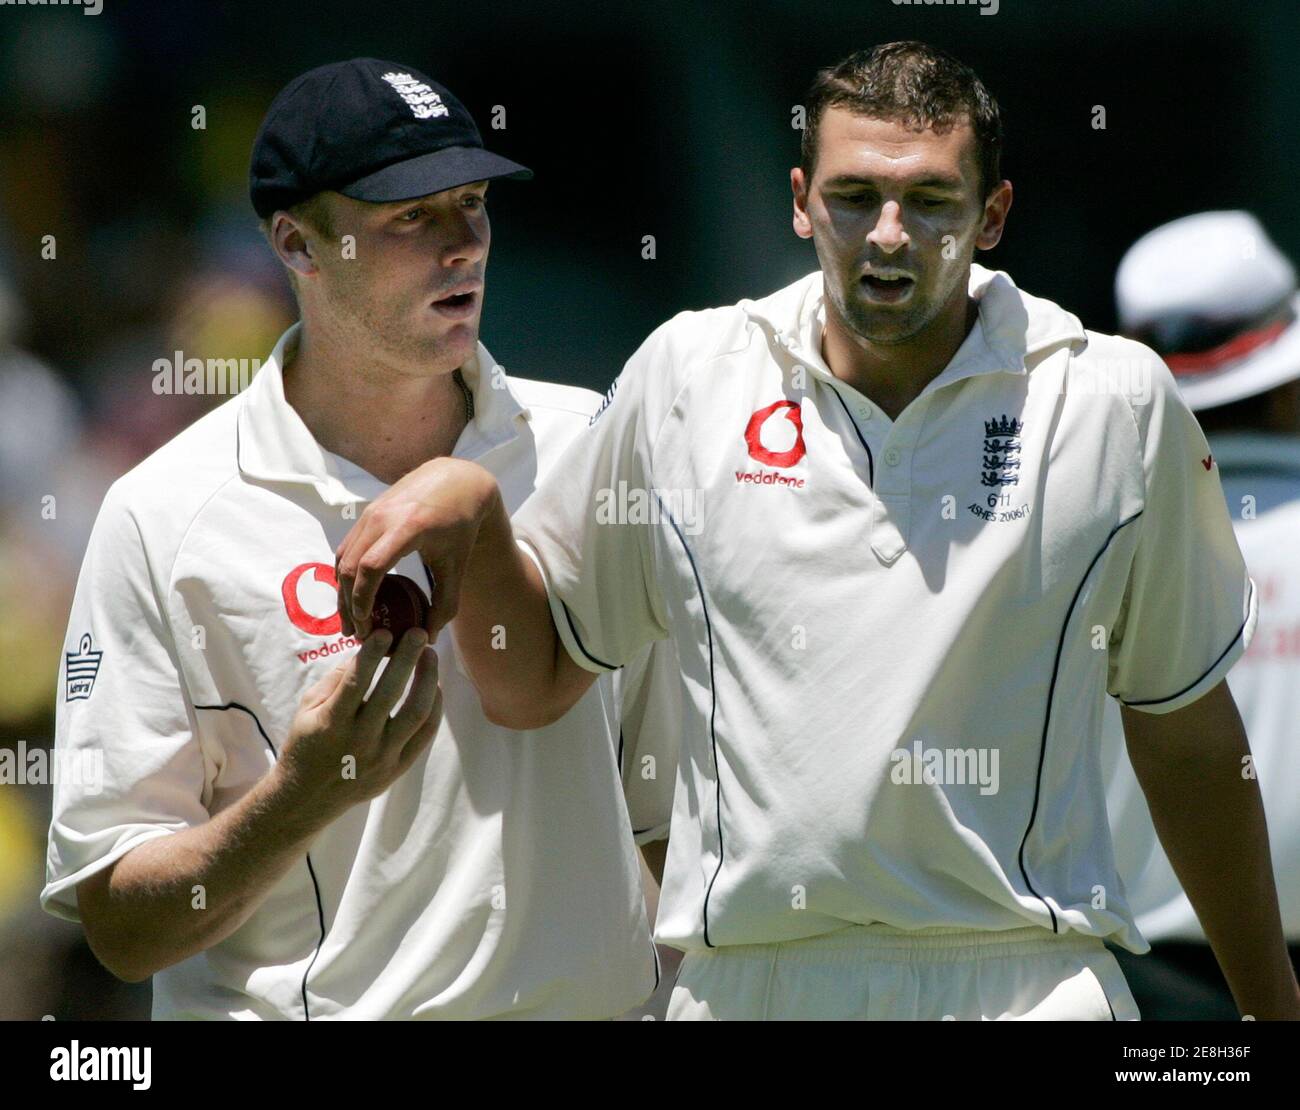 England's captain Andrew Flintoff (L) has a word with pace bowler Steve Harmison before Harmison's opening spell on the first day of the third Ashes cricket test against Australia in Perth December 14, 2006. Australia lead the best-of-five series 2-0. MOBILES OUT, EDITORIAL USE ONLY REUTERS/Will Burgess  (AUSTRALIA) Stock Photo